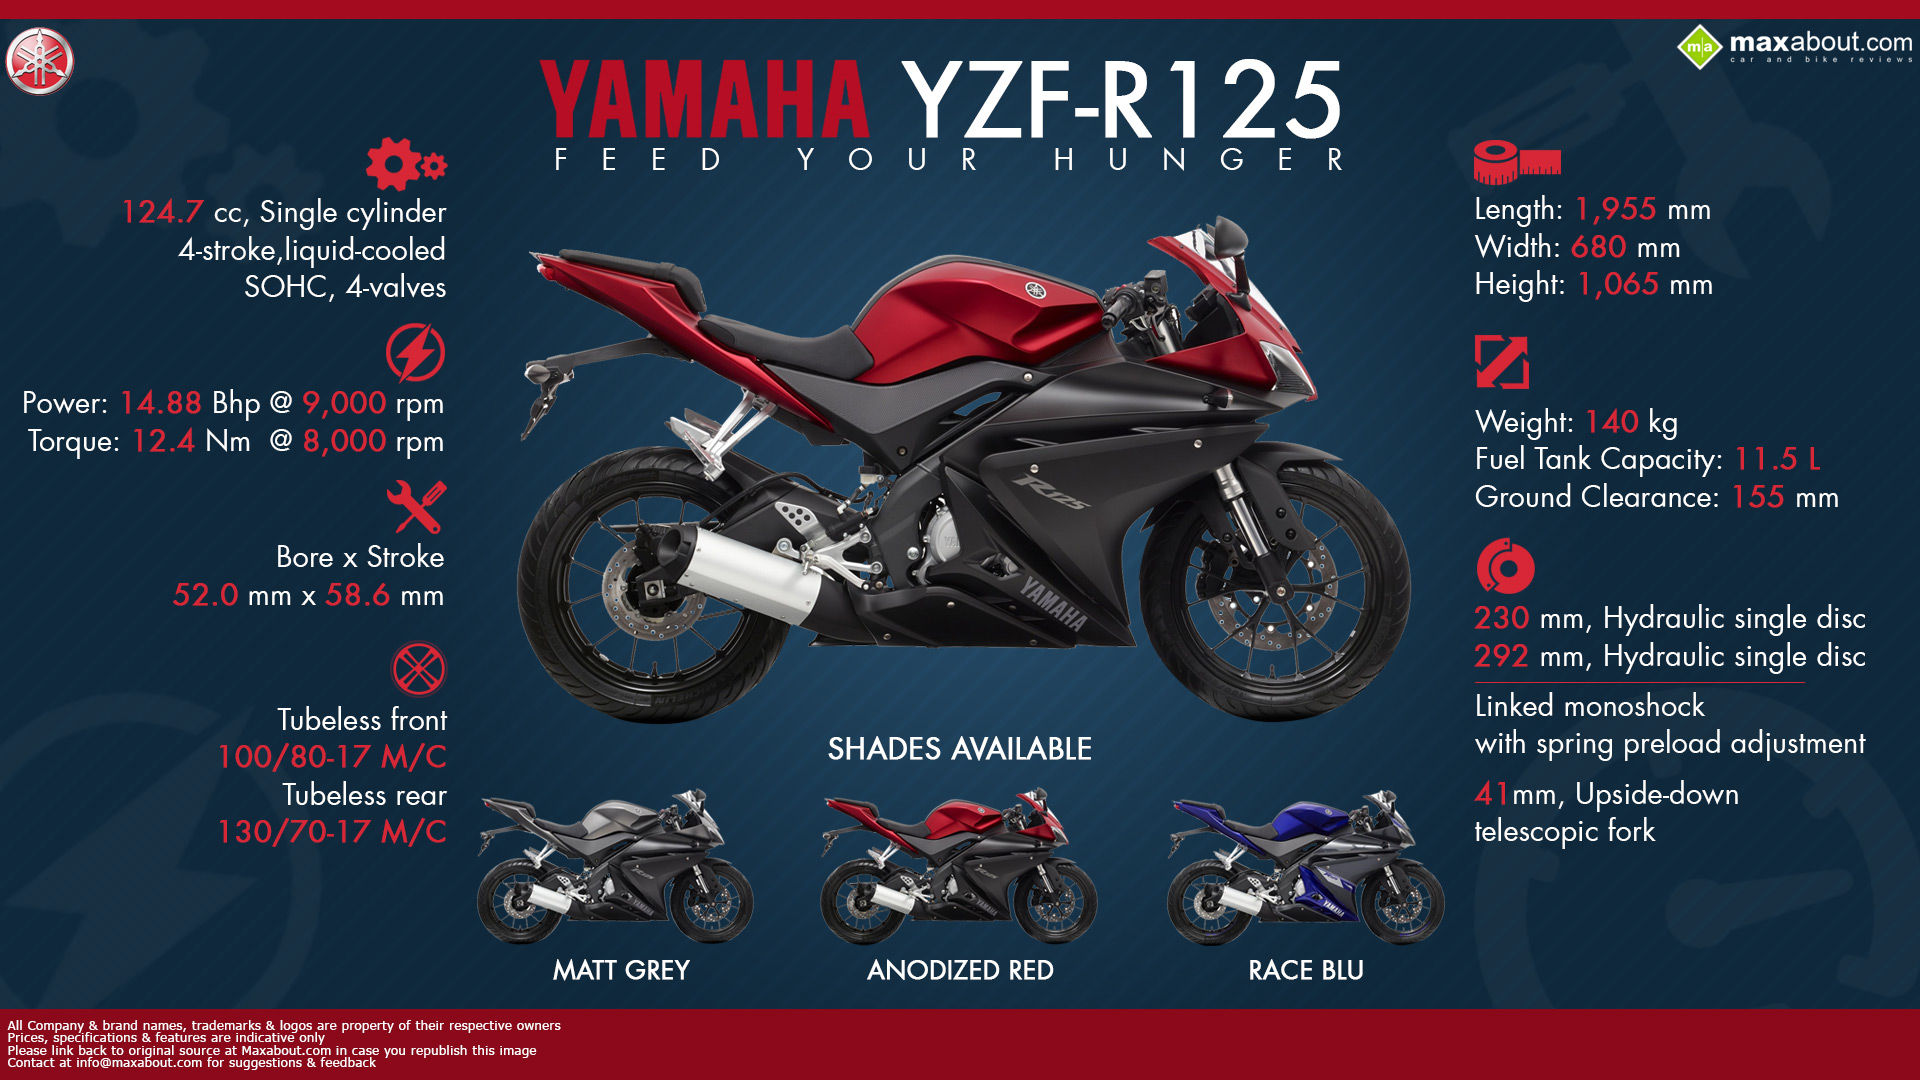 Yamaha Yzf R125 Feed Your Hunger